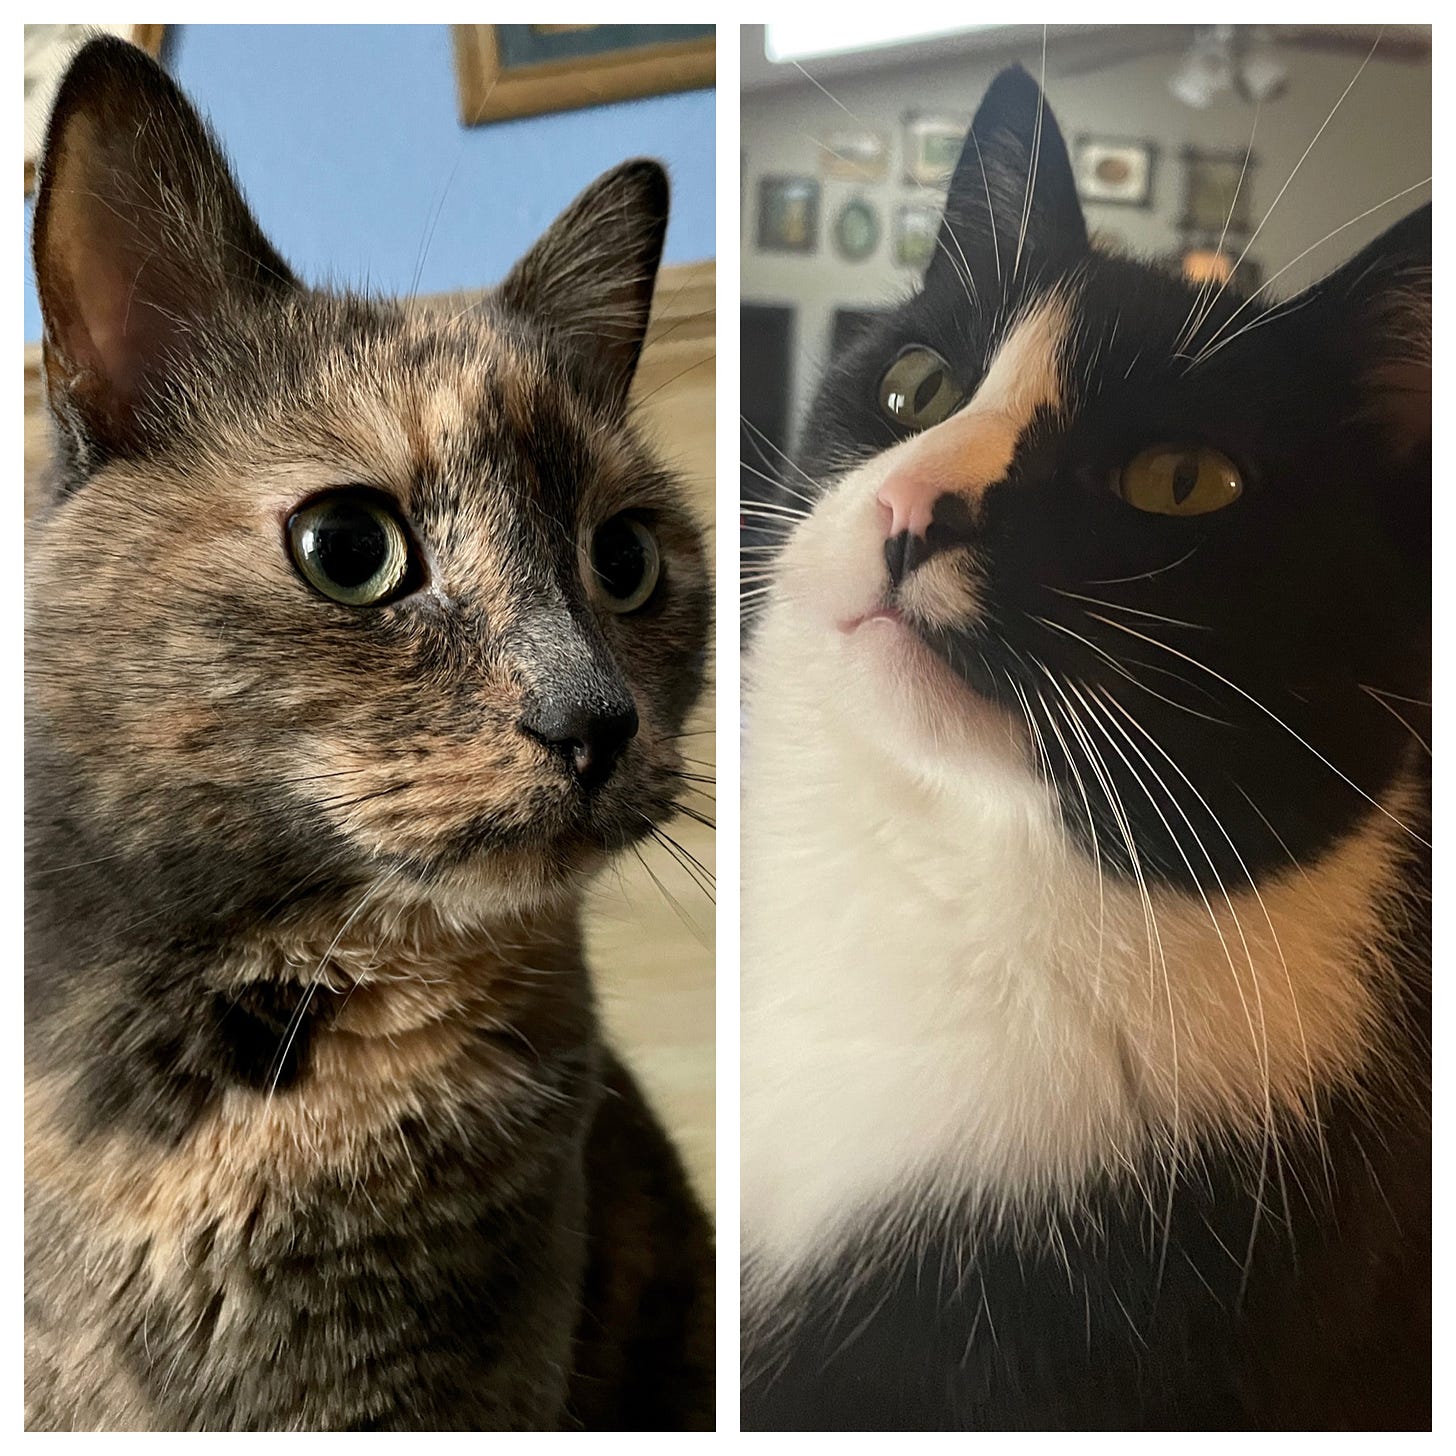 Left: a dilute tortoiseshell cat looking off to the right, alert and bright-eyed. She’s pretty and she knows it. Right: a tuxedo cat looking off to the left, chin held high. He’s glad the artist has come at last to make his official portrait.